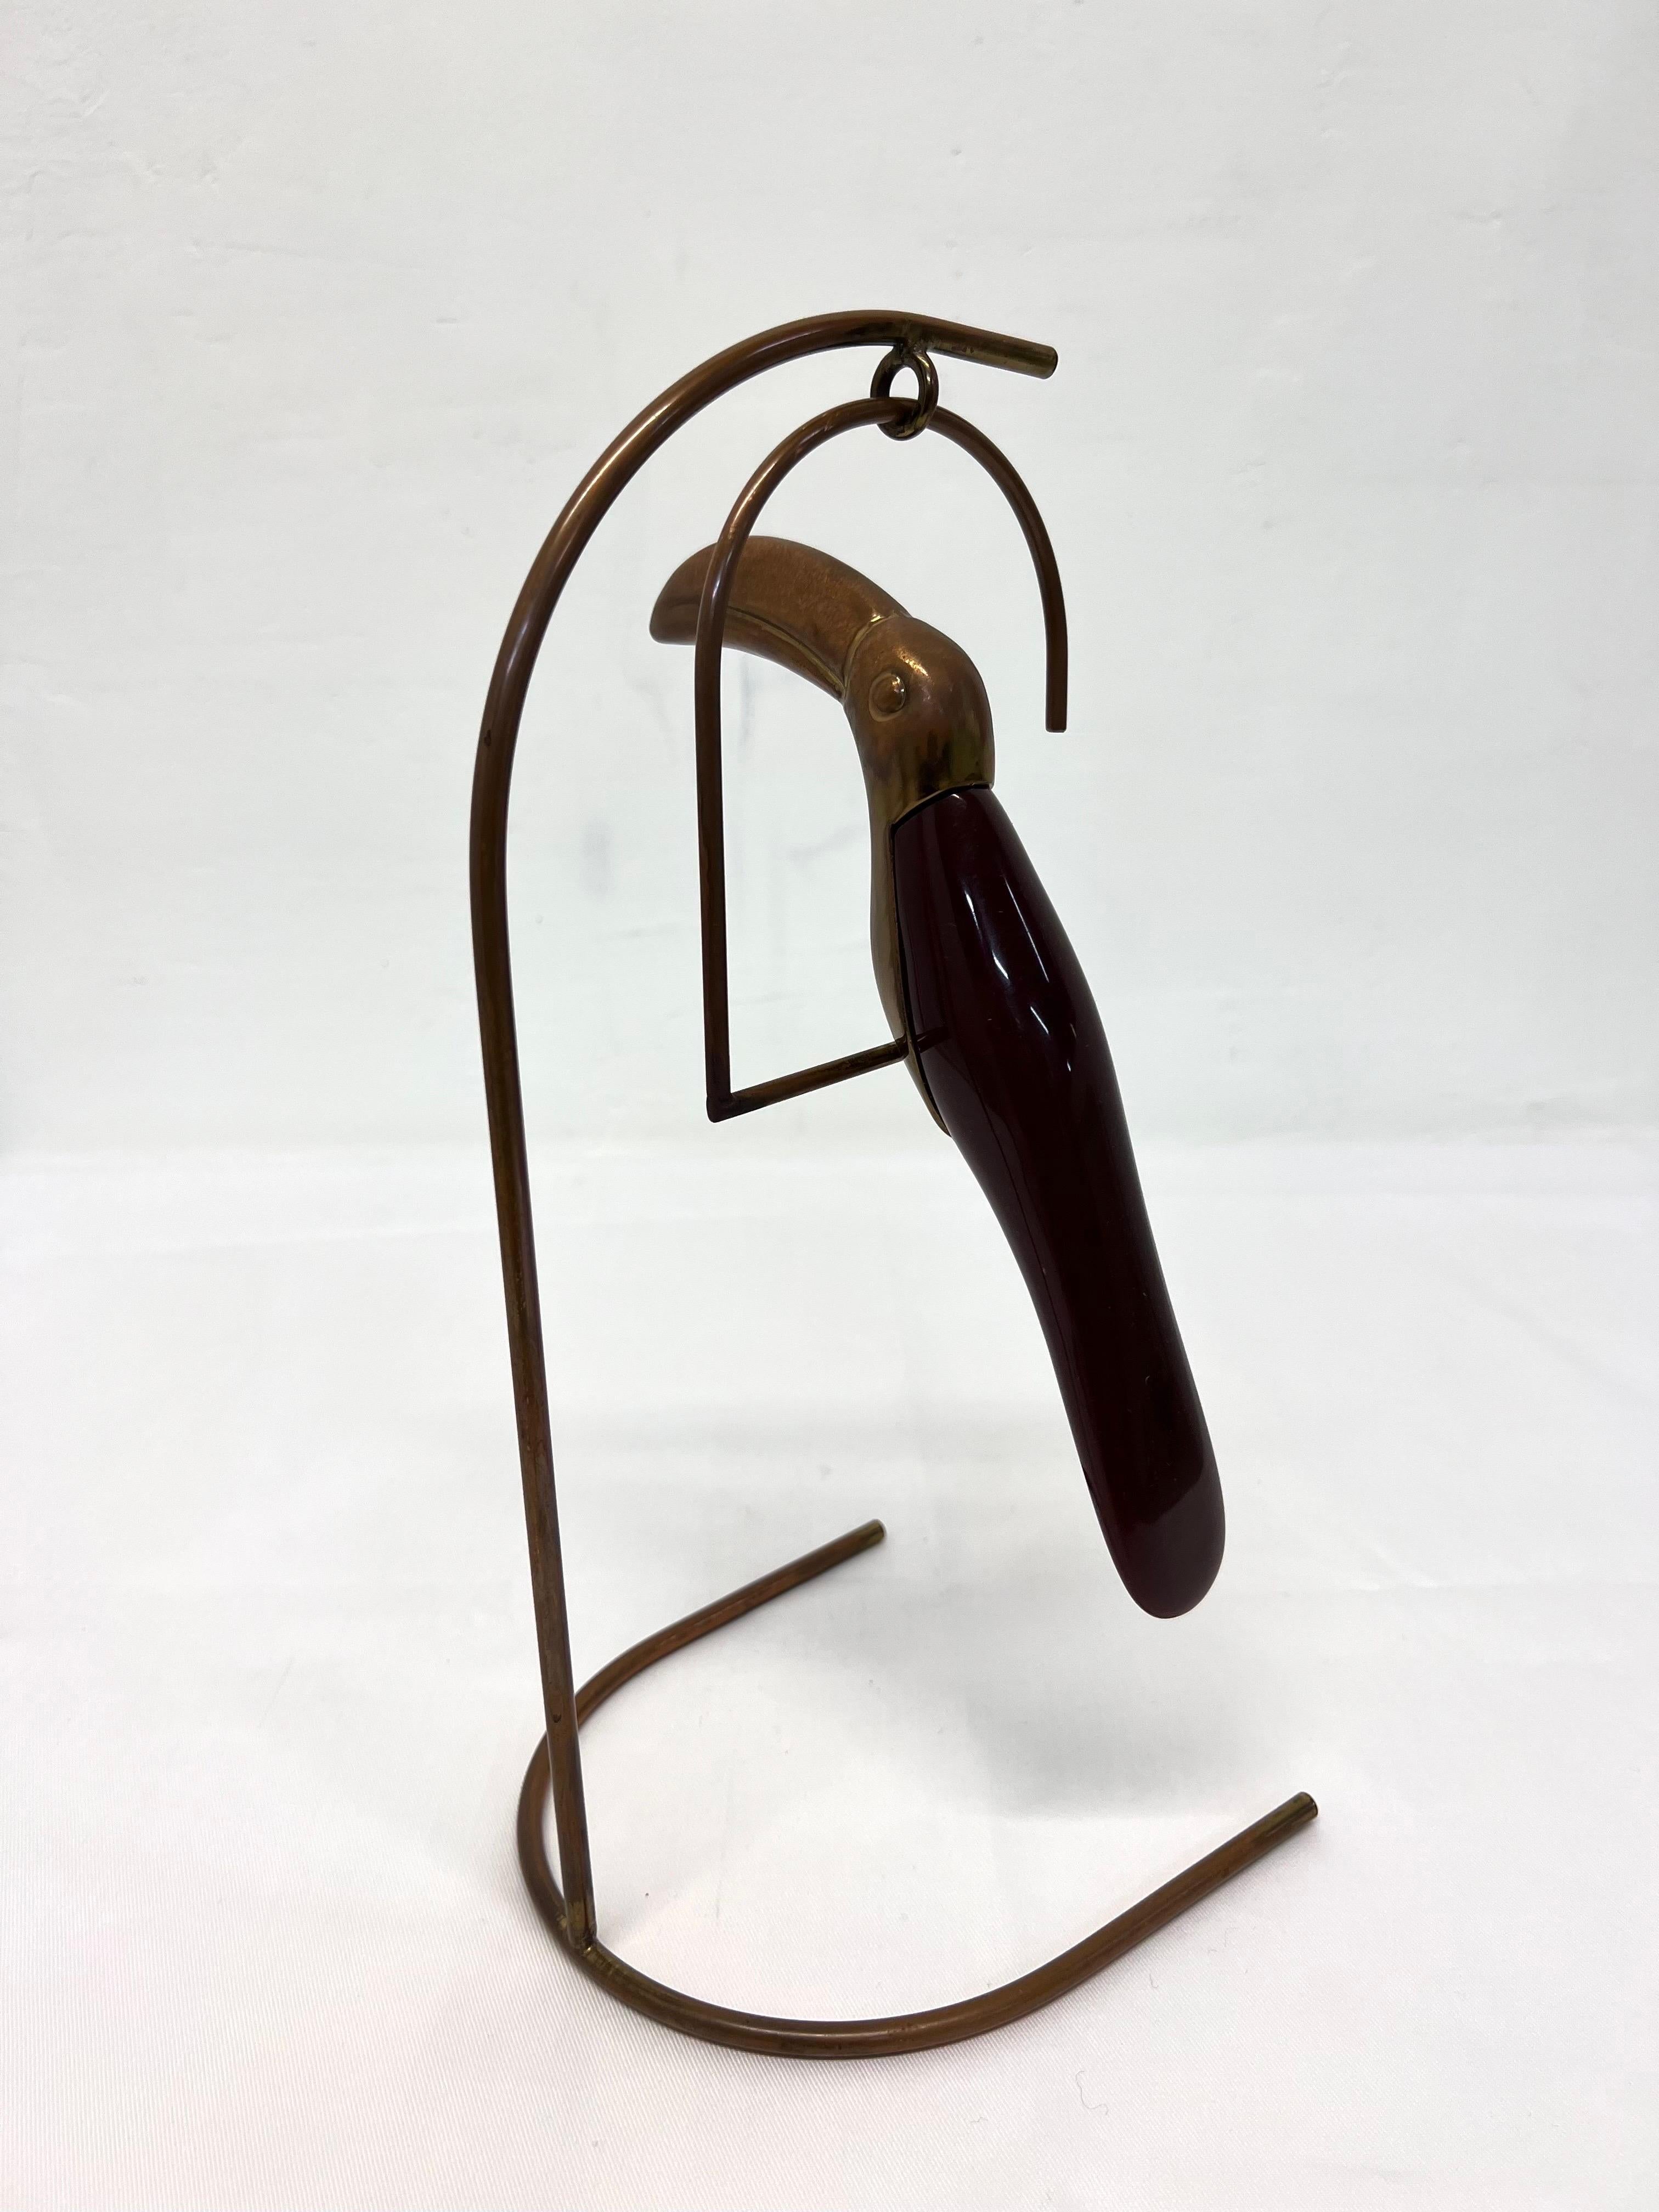 Brazilian Mid-Century Modern Brass and Resin Toucan on Stand, 1960s For Sale 1